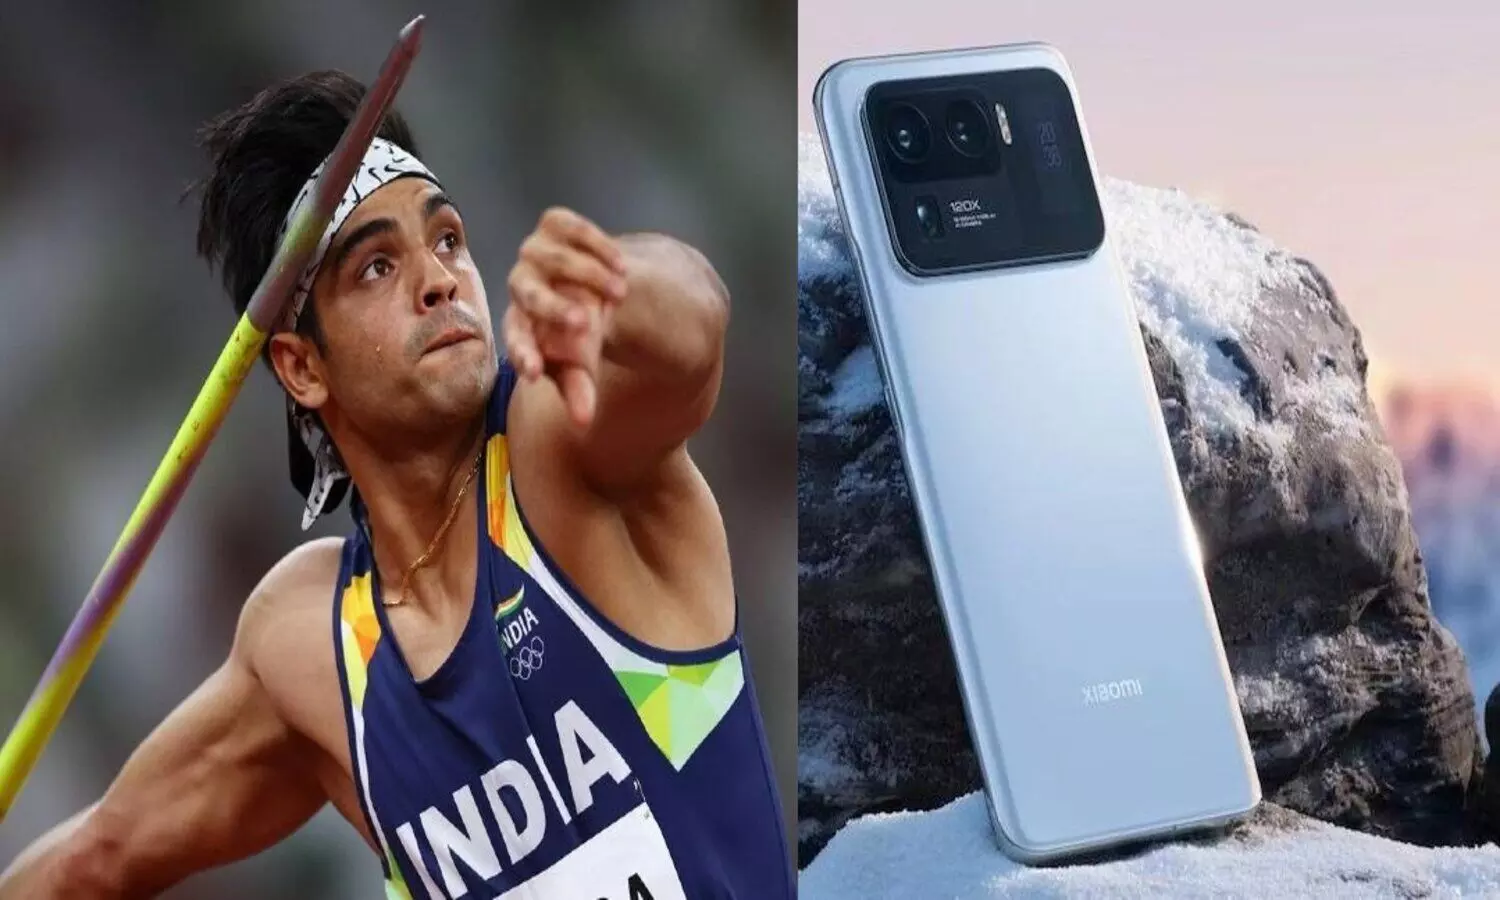 winning Indian athlete will get a smartphone from Xiaomi